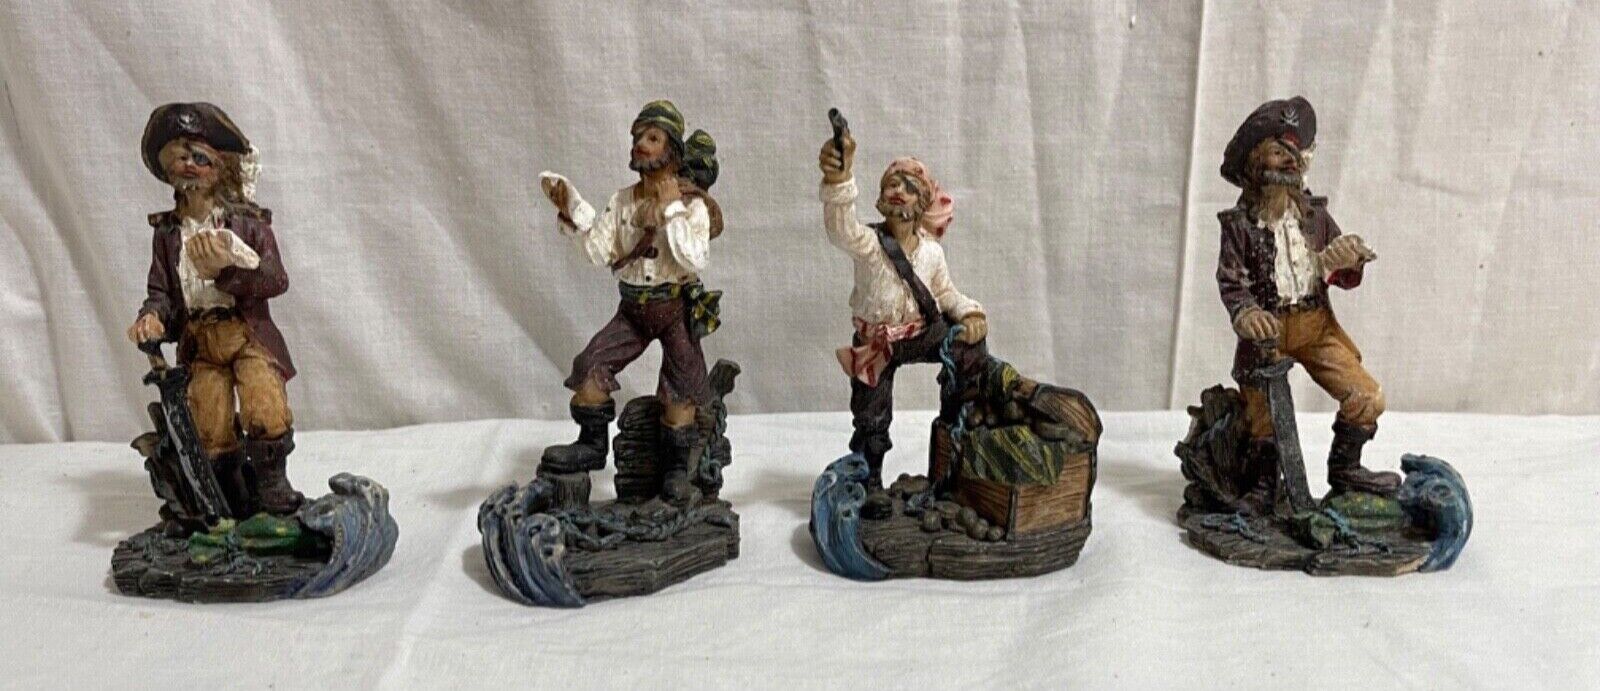 Set of 4 Pirate Figurines. Pirate collectibles. Pirate decoration